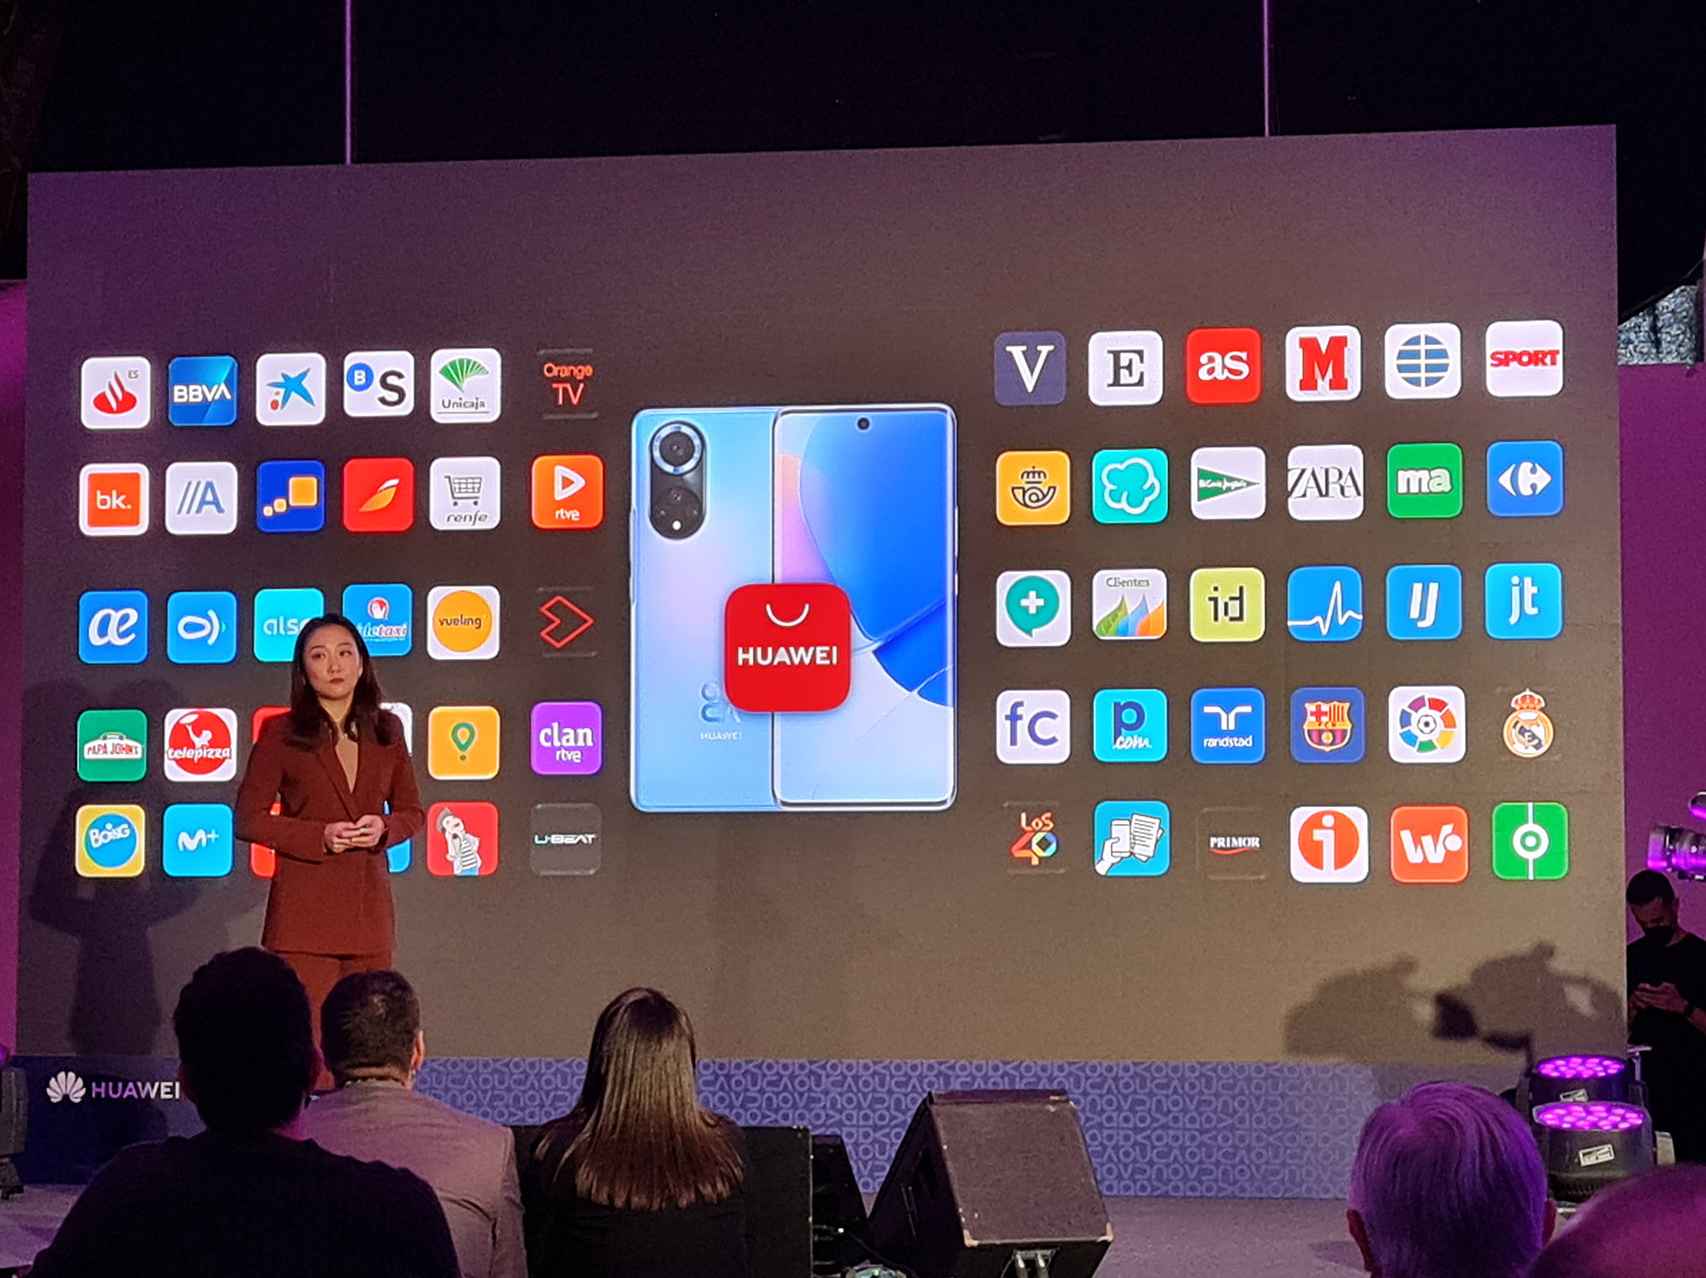 Huawei has a large catalog of partners and applications in Europe